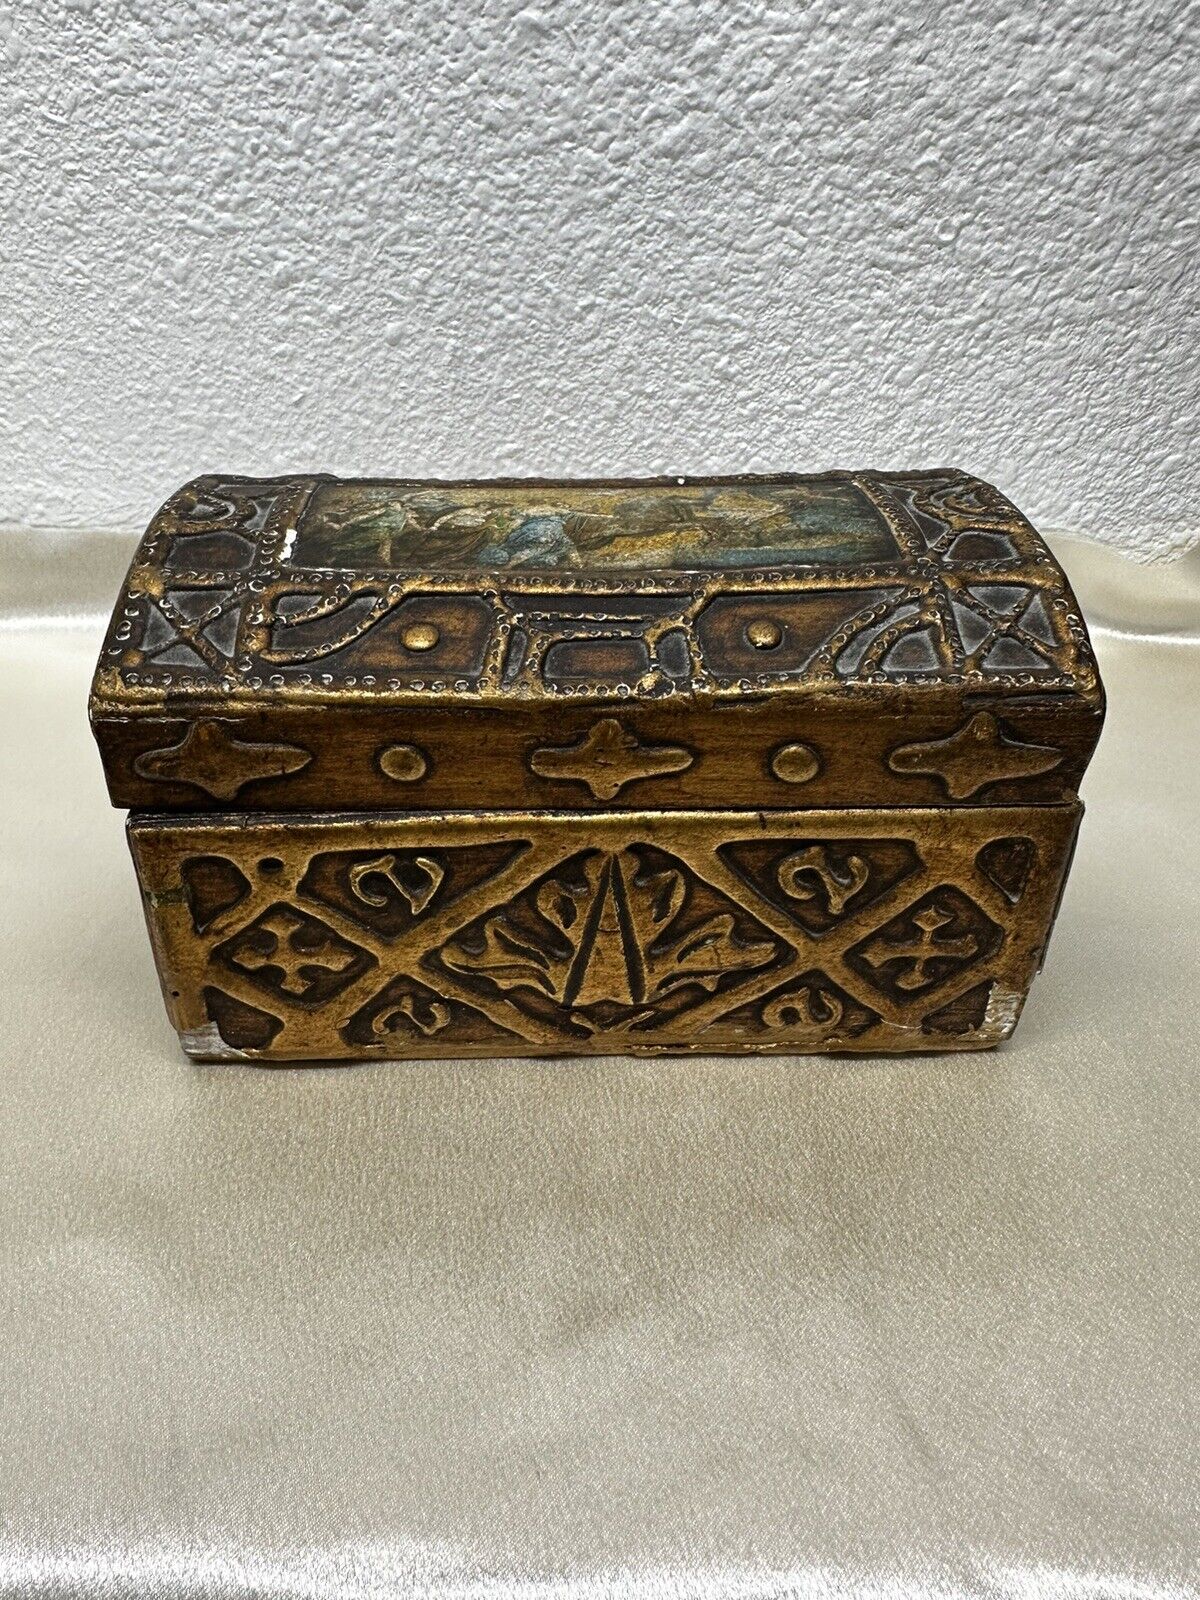 Antique Fratelli Paoletti Firenze Italian Wooden Hand Painted Box